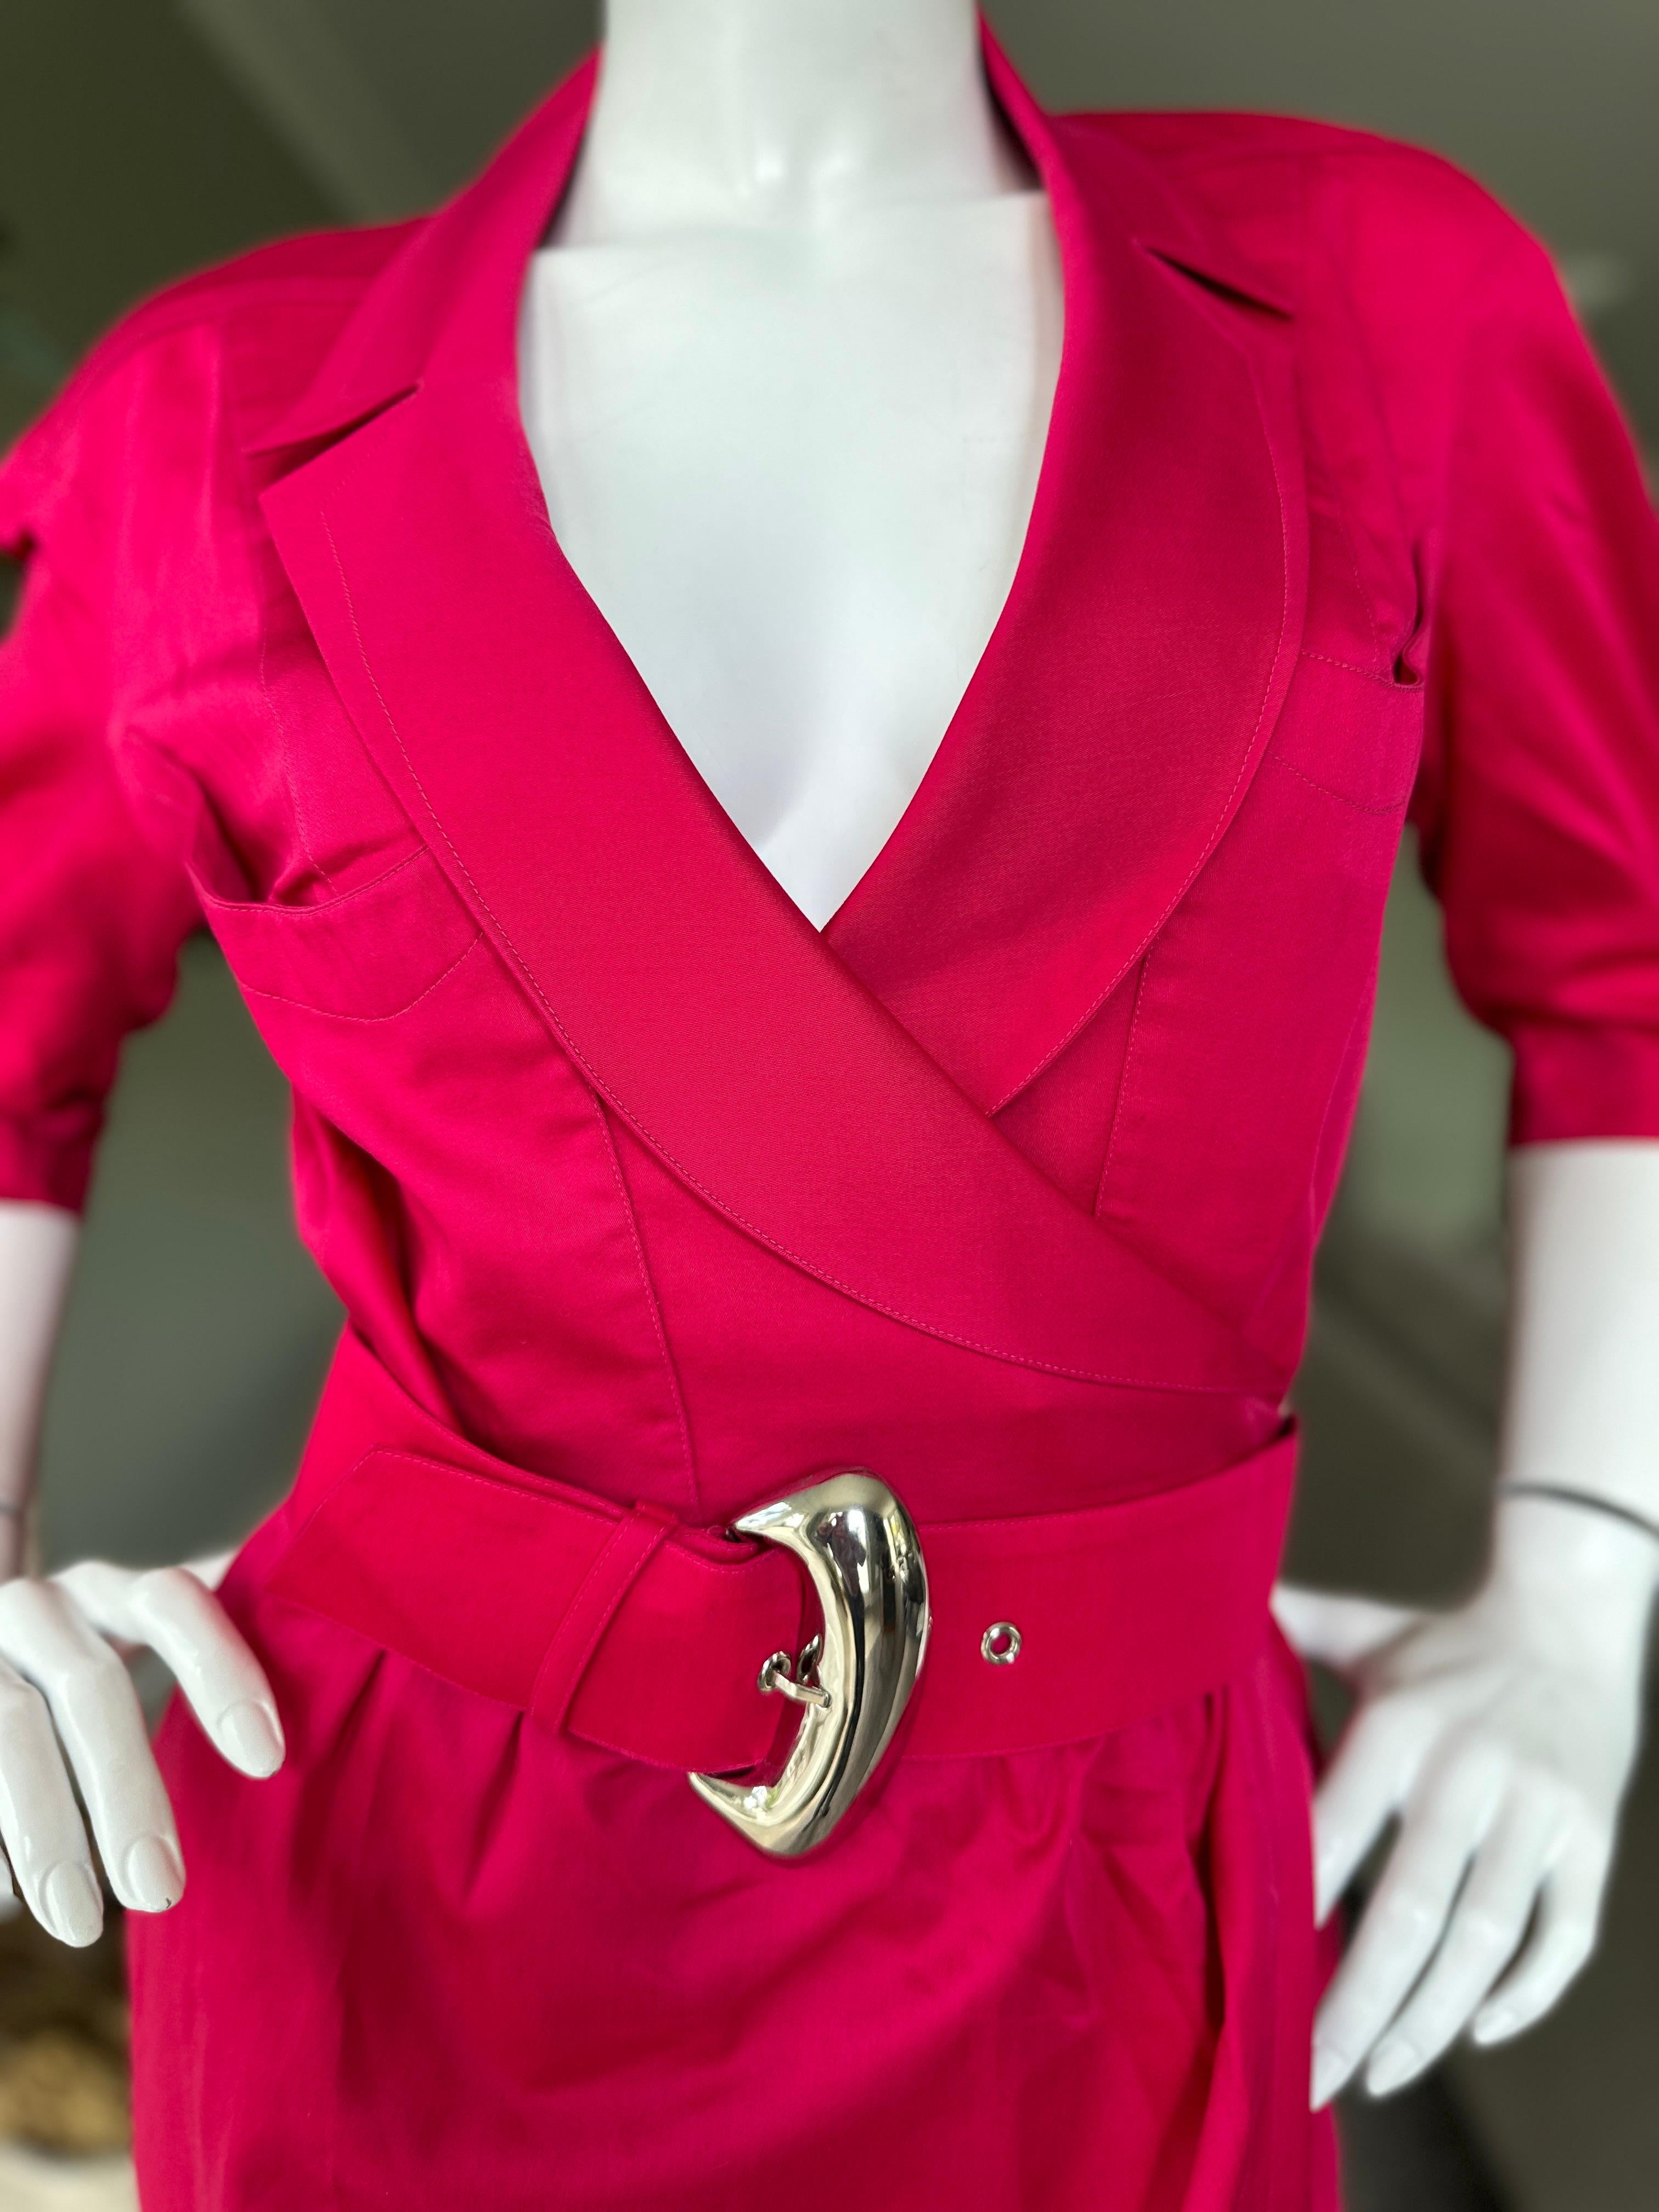 Thierry Mugler Vintage 1980's Hot Pink Silk Wrap Style Dress with Mod Buckle In Excellent Condition For Sale In Cloverdale, CA